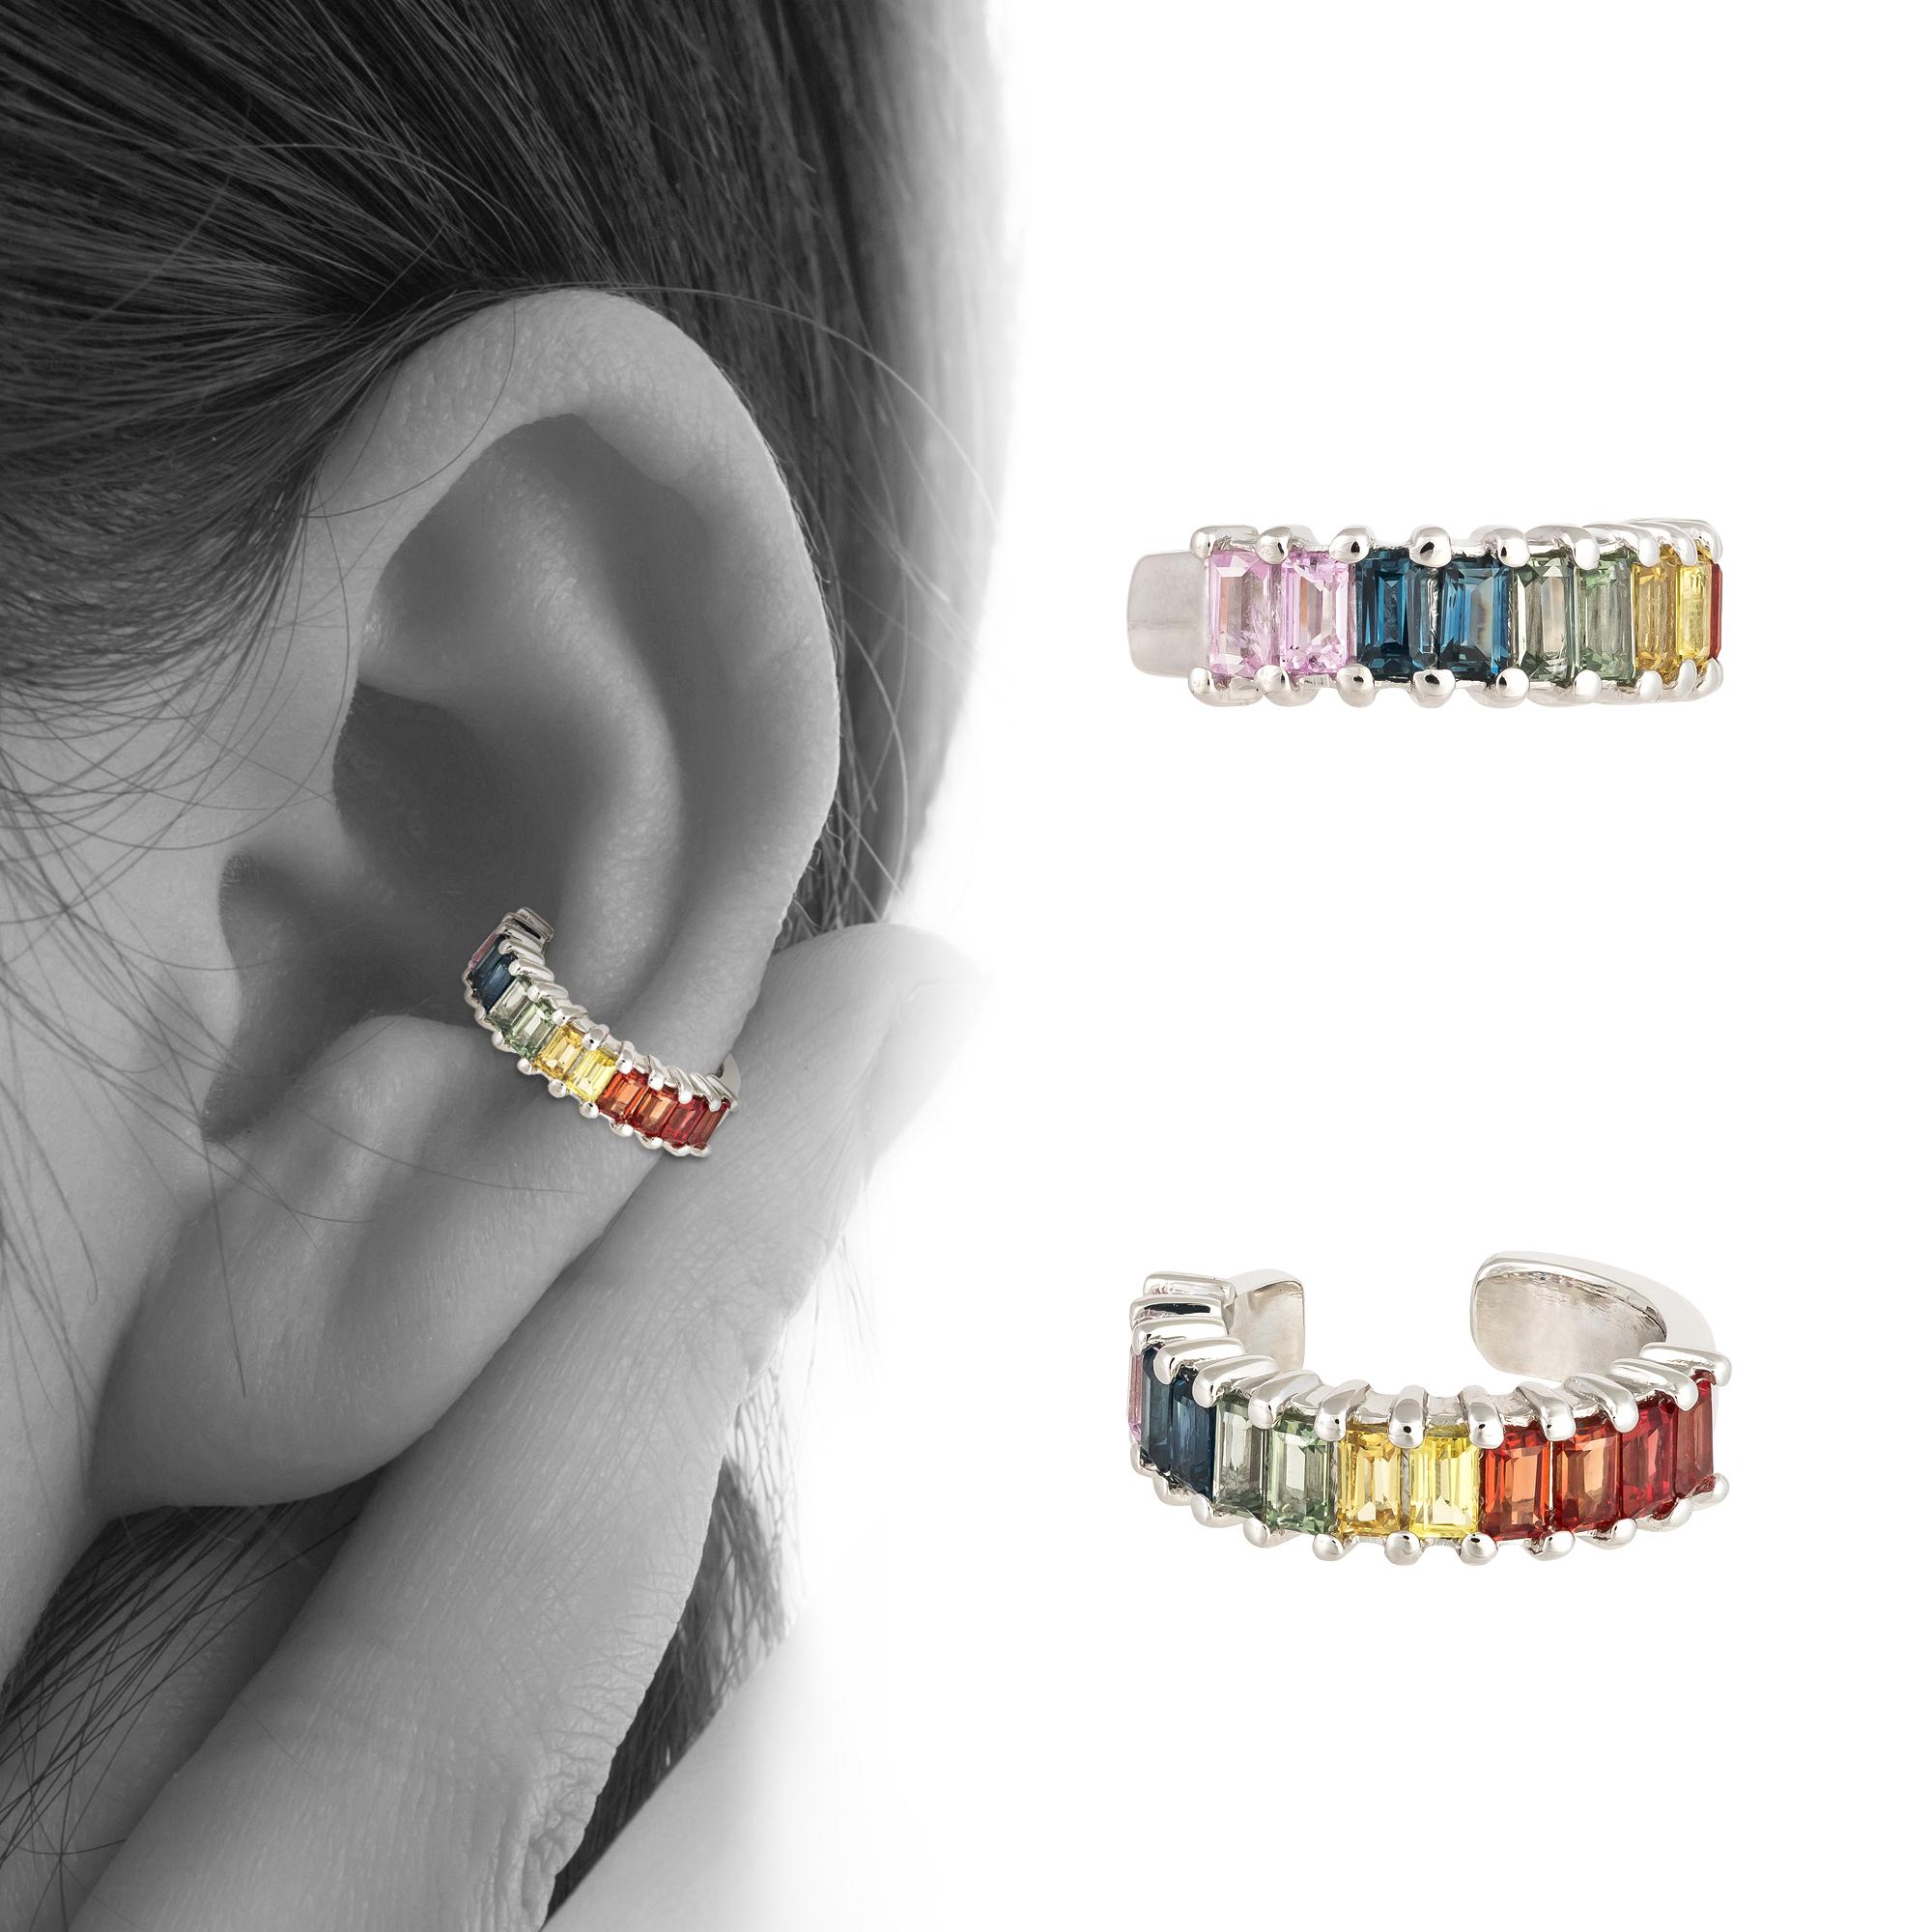 Earrings White Gold 18 K
Cuff one piece
Multi Sapphire 0.57 Cts/12 Pcs
Weight 1,73 grams

With a heritage of ancient fine Swiss jewelry traditions, NATKINA is a Geneva based jewellery brand, which creates modern jewellery masterpieces suitable for